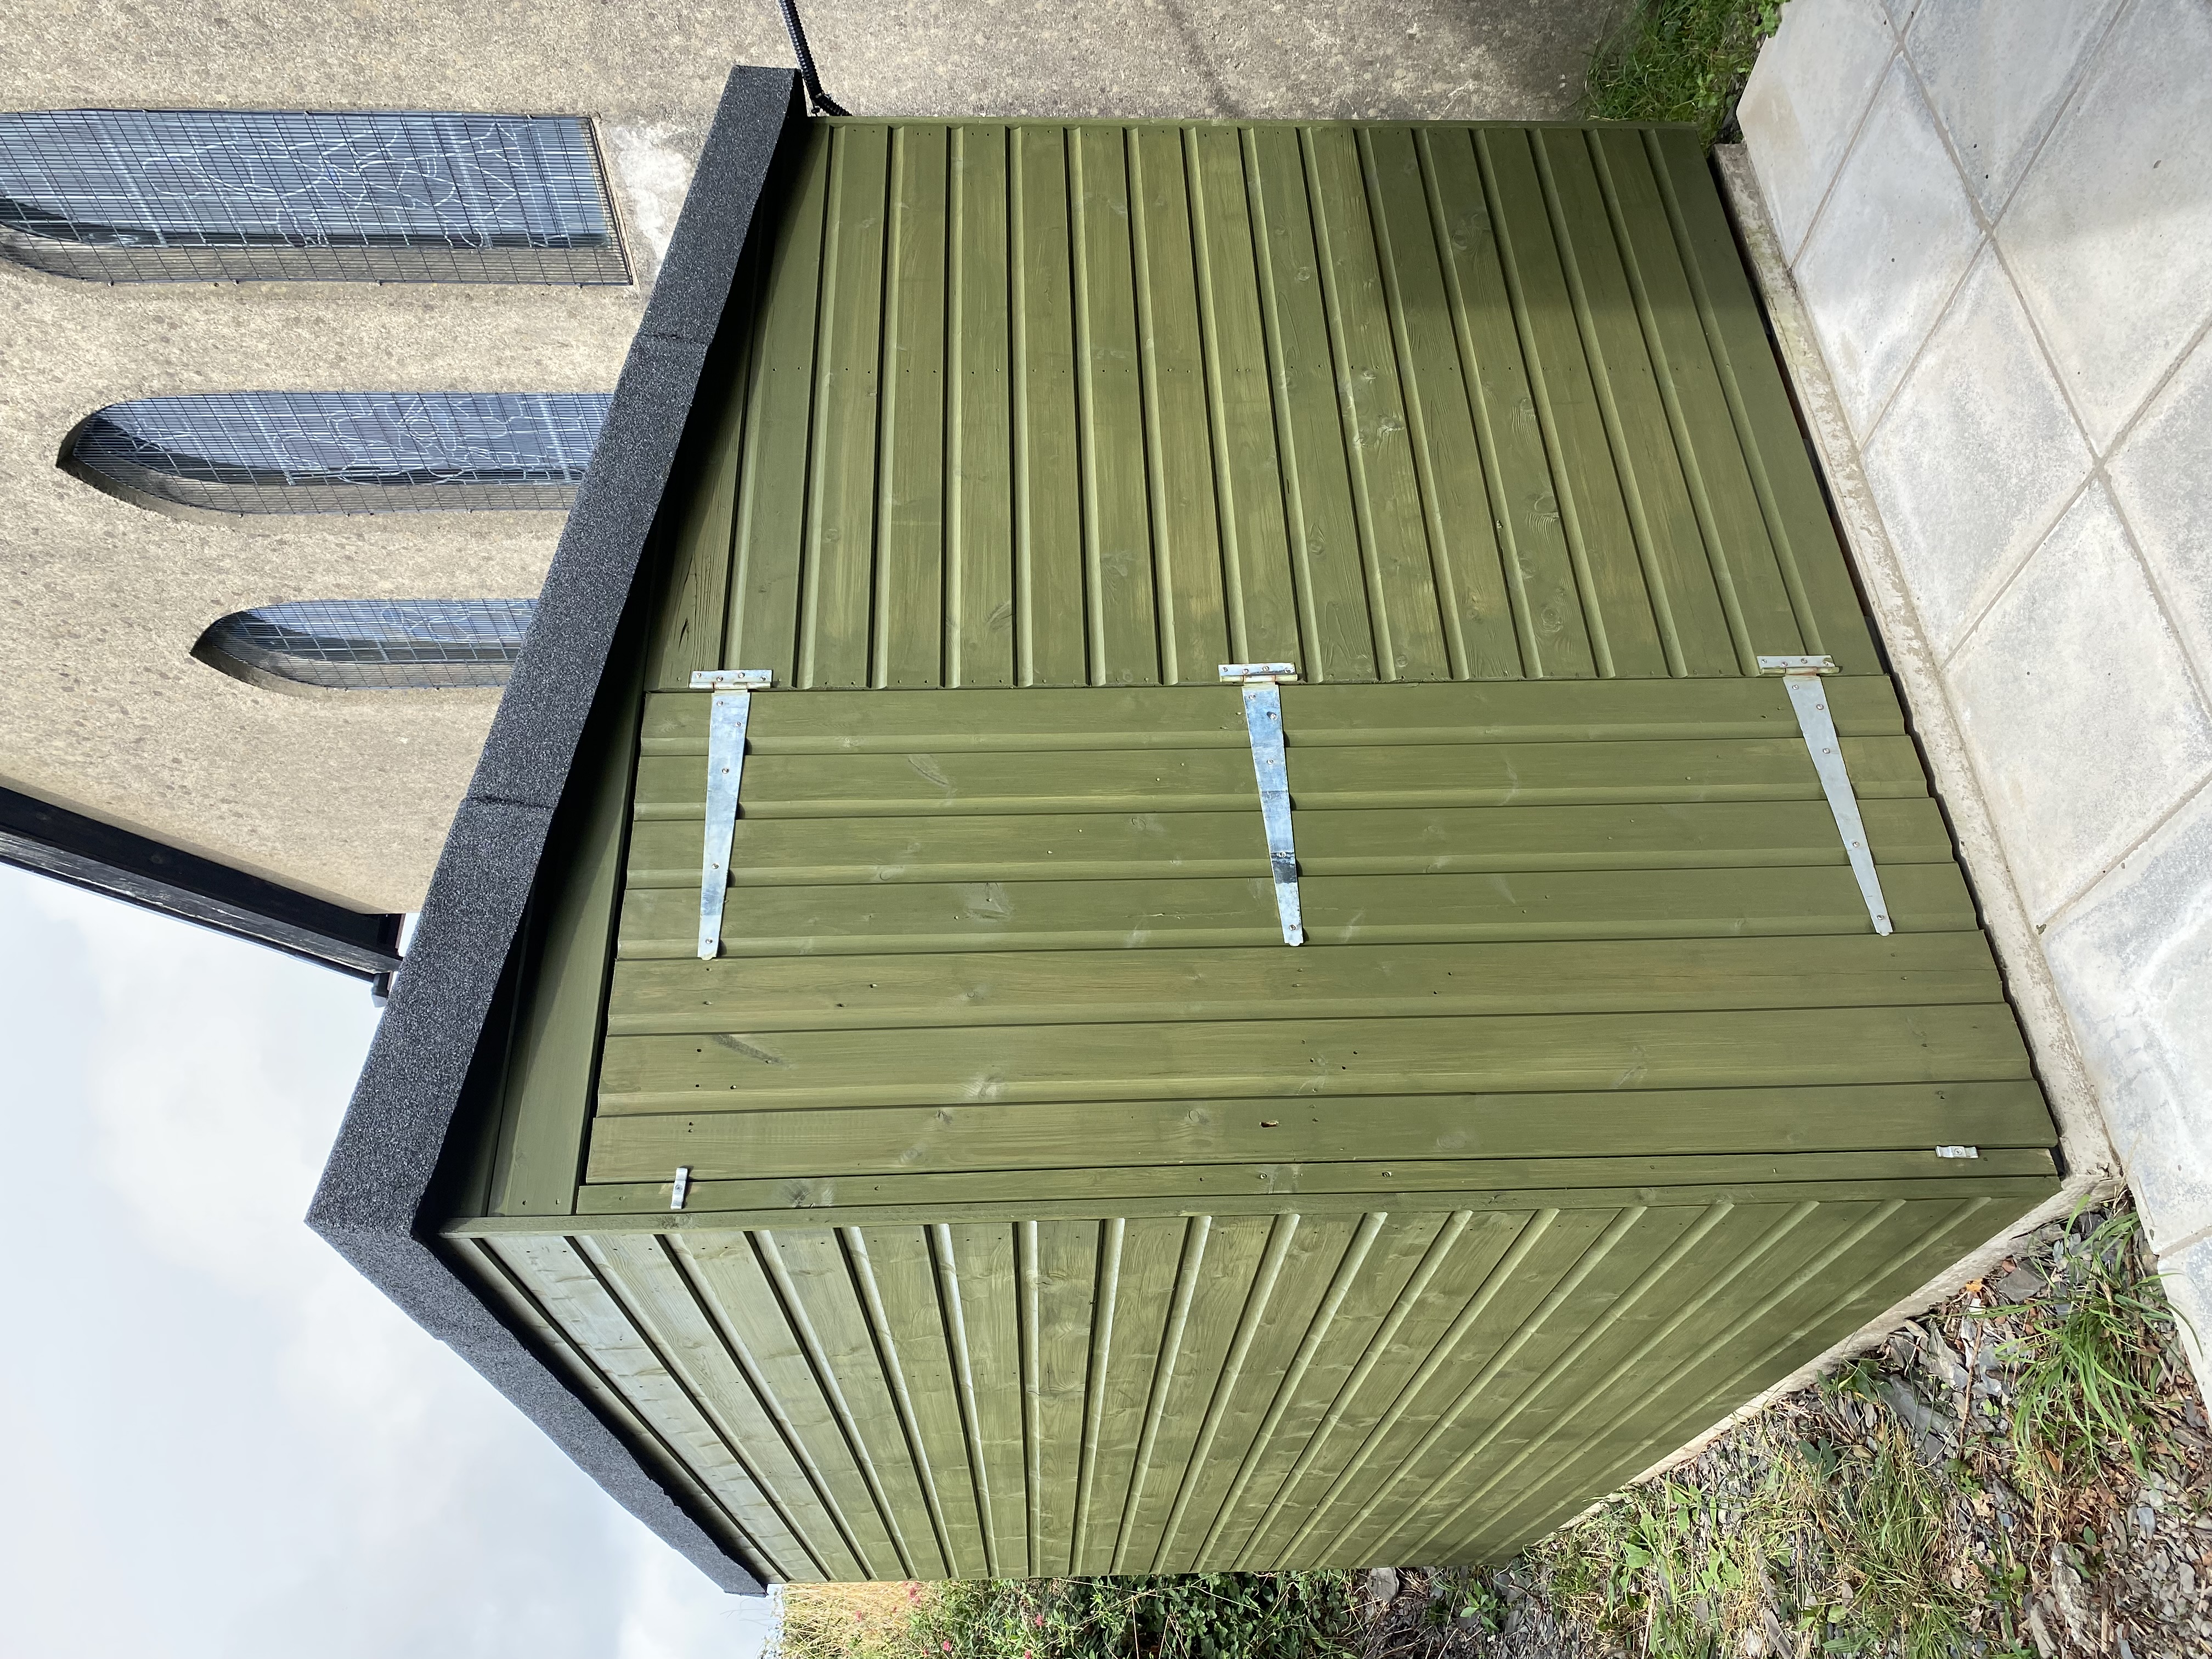 Photograph showing new shed painted green as requested